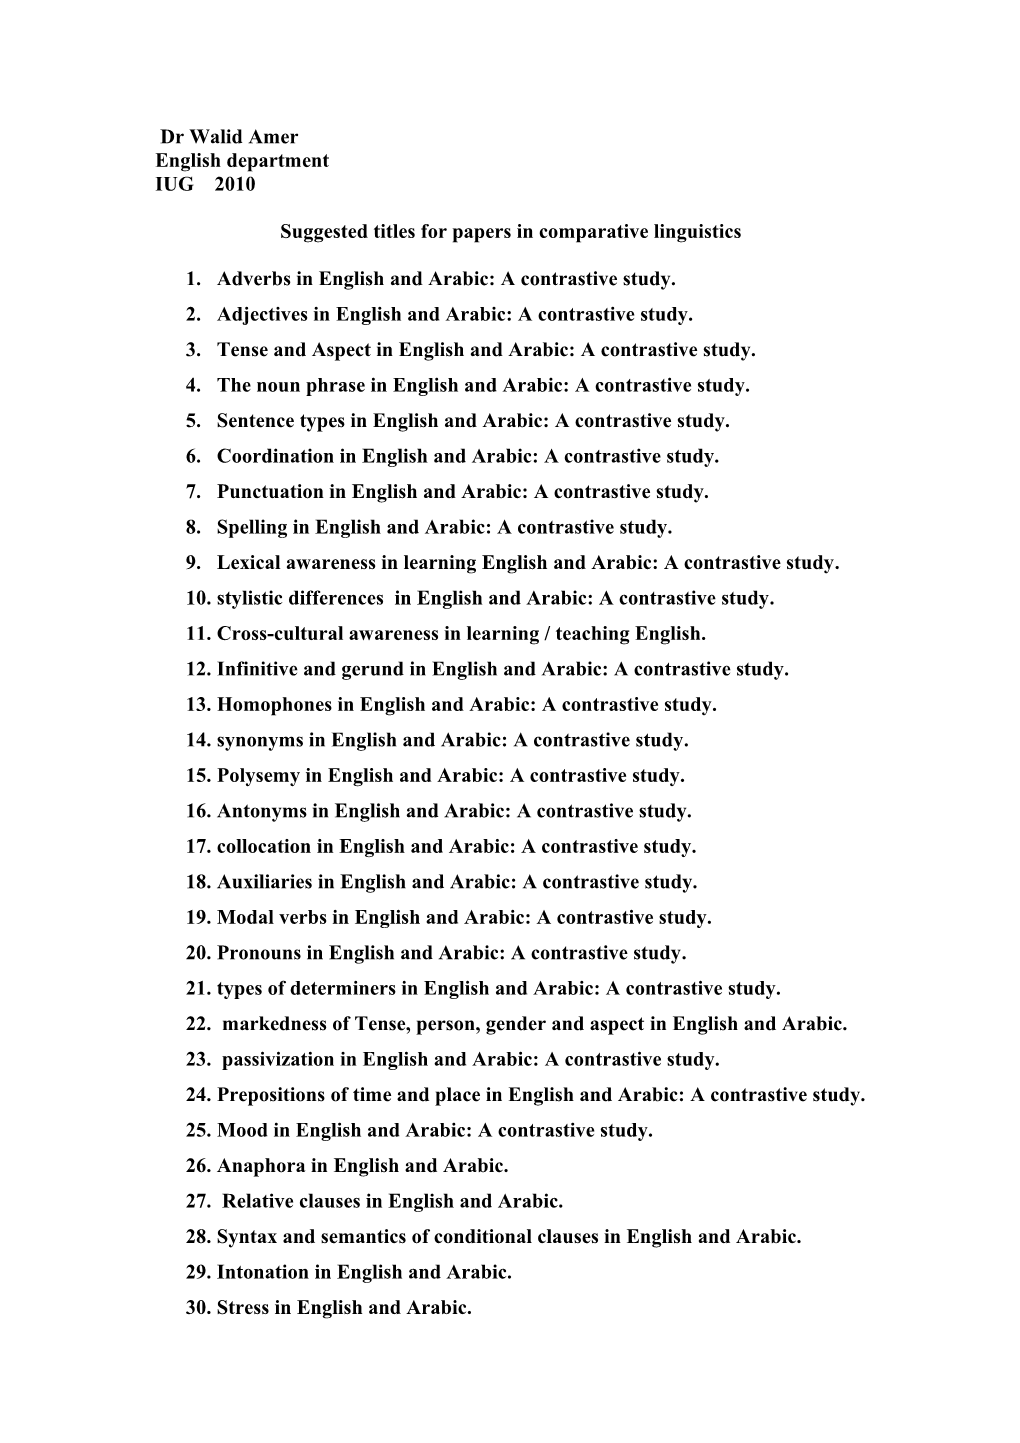 Titles of Papers in Comparative Linguistics